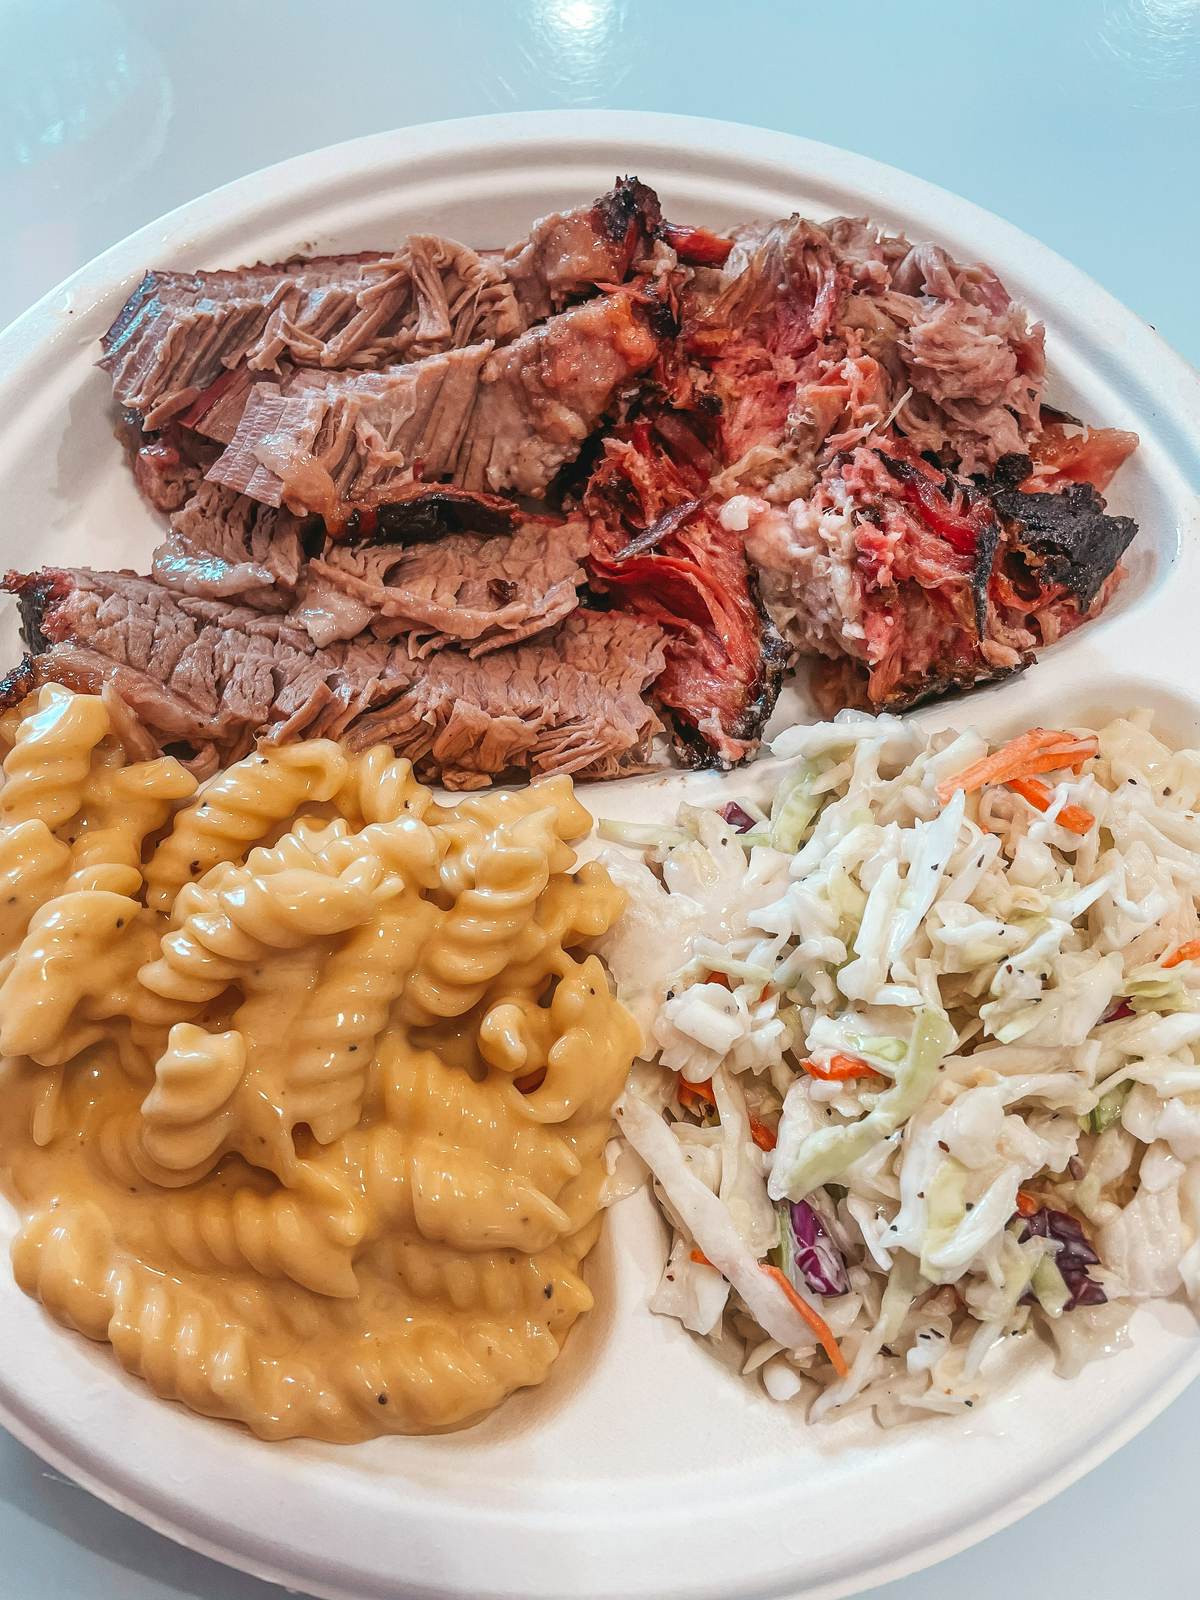 IDK BBQ in Tropic. Mac and cheese, brisket, and coleslaw